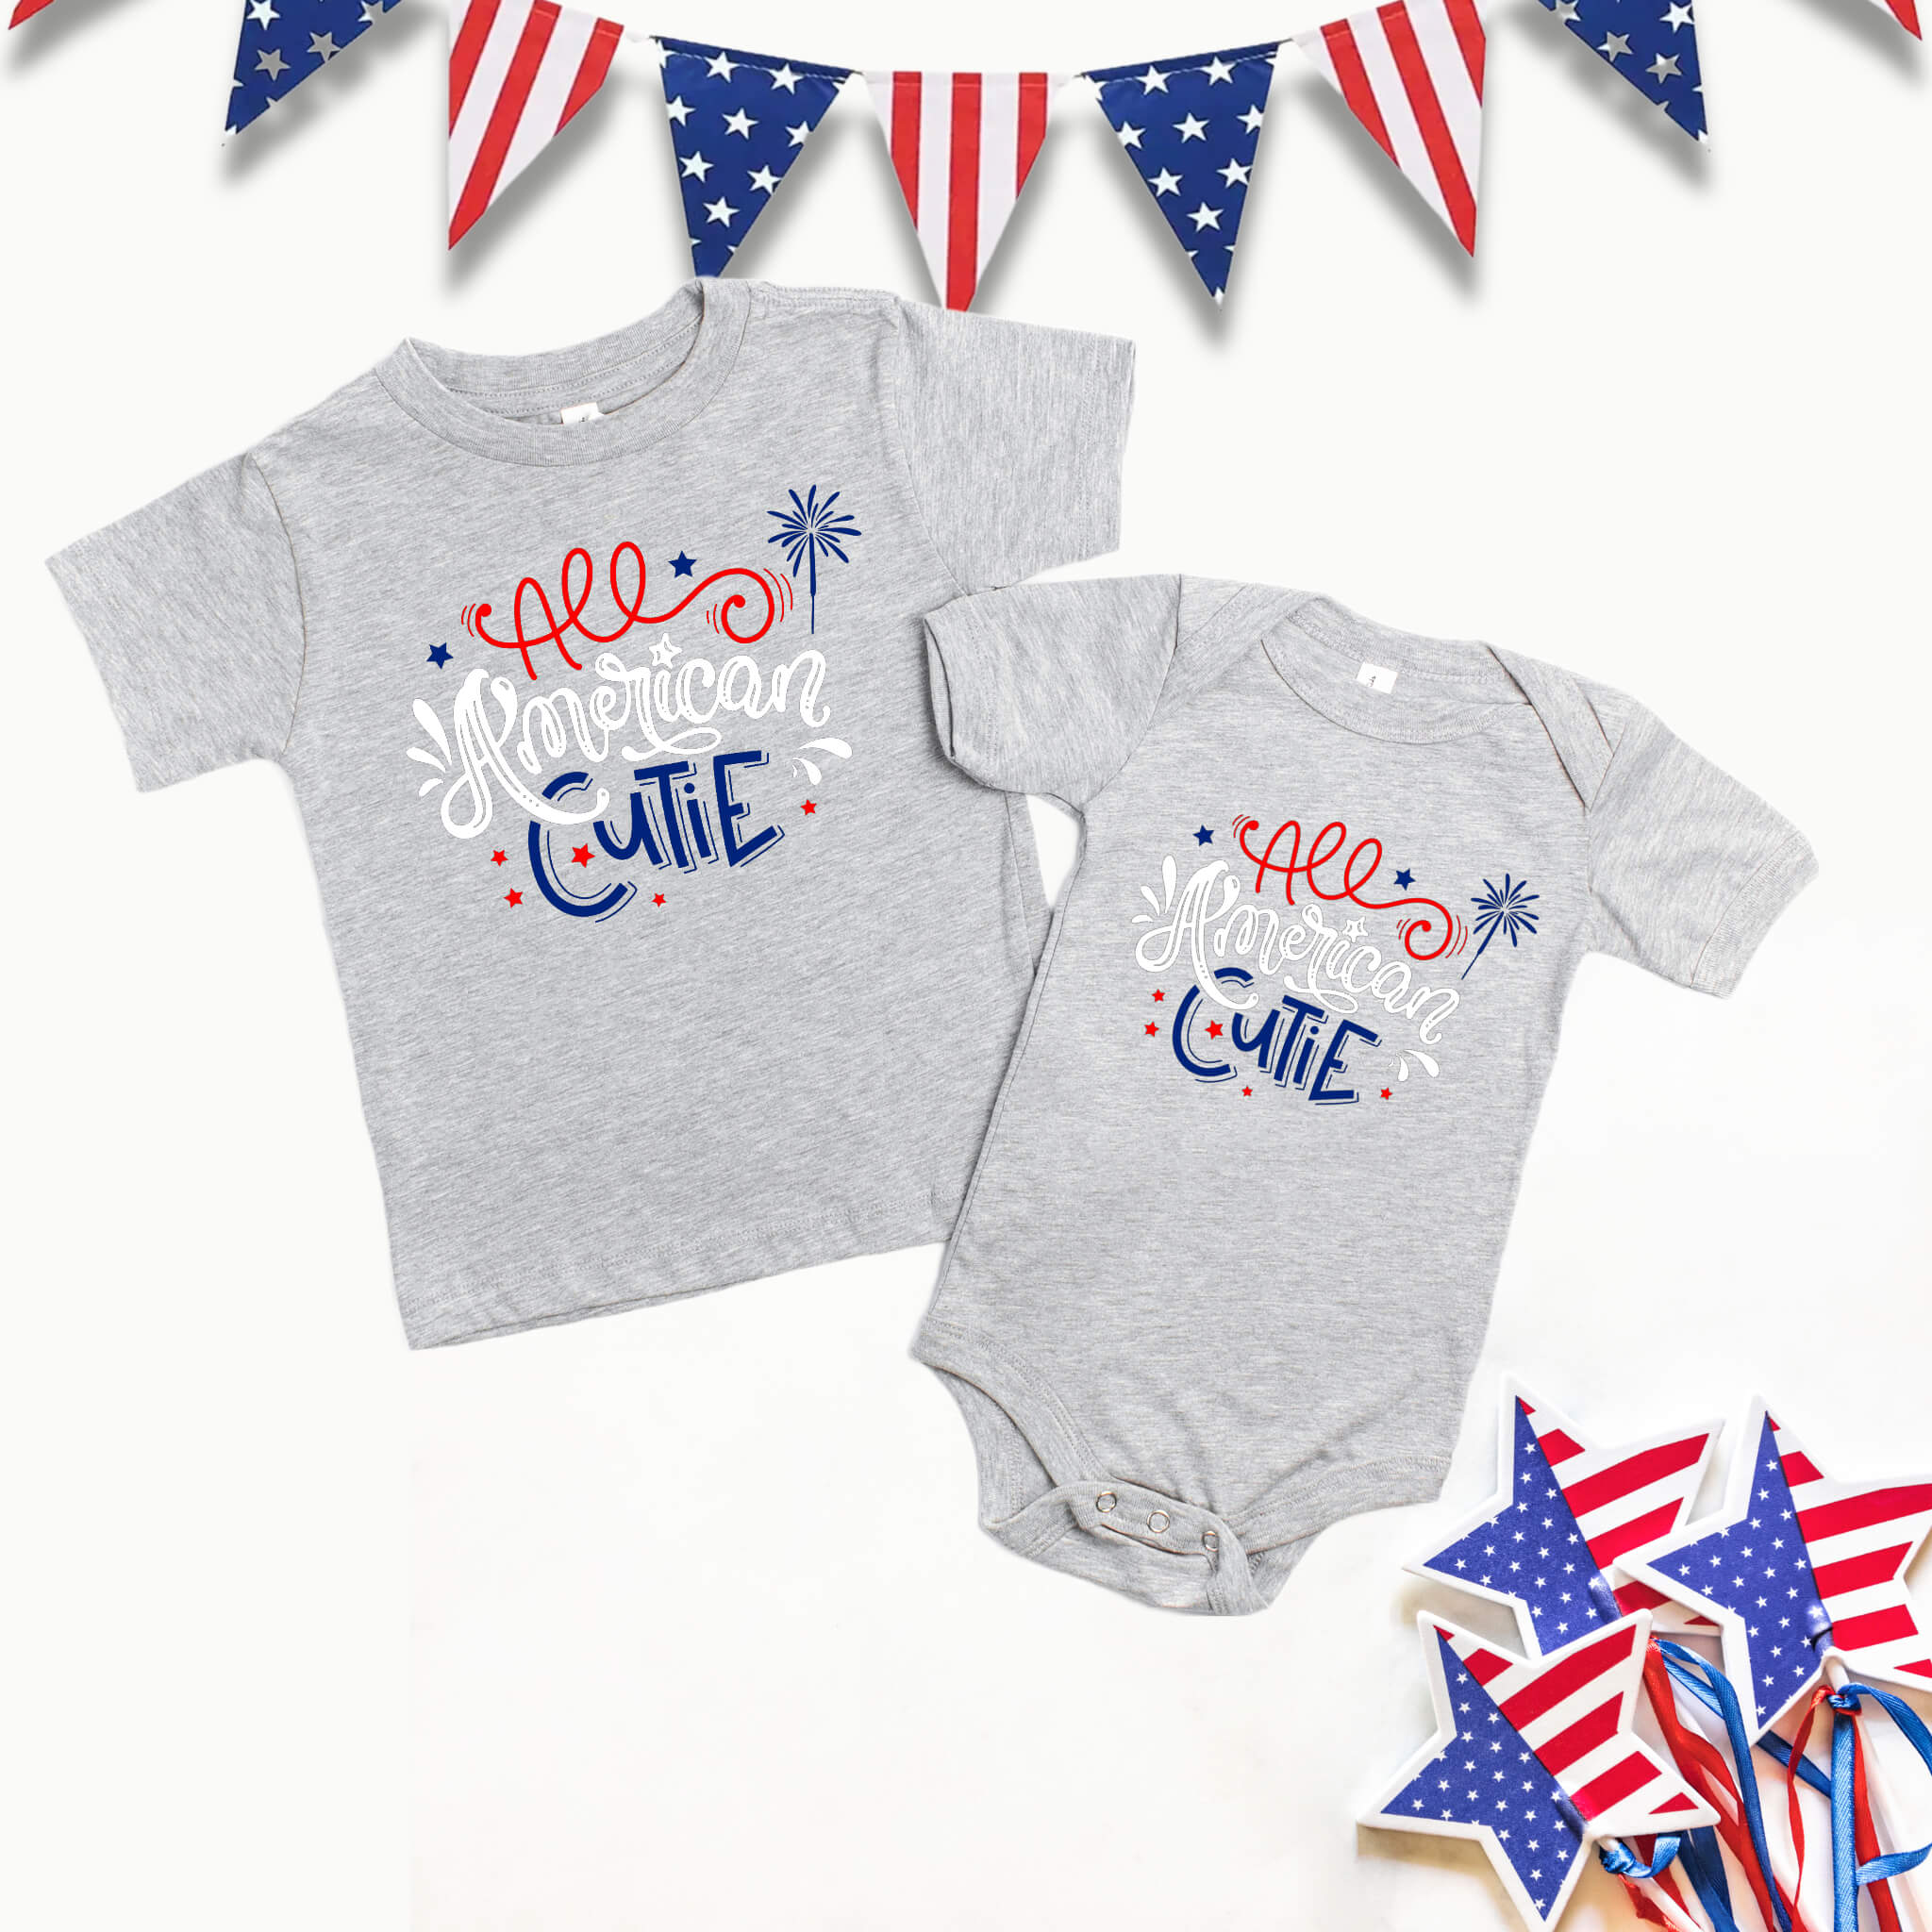 4th of July - All American Cutie Patriotic Boy’s Girl’s Unisex Graphic Print Onesie / T-shirt